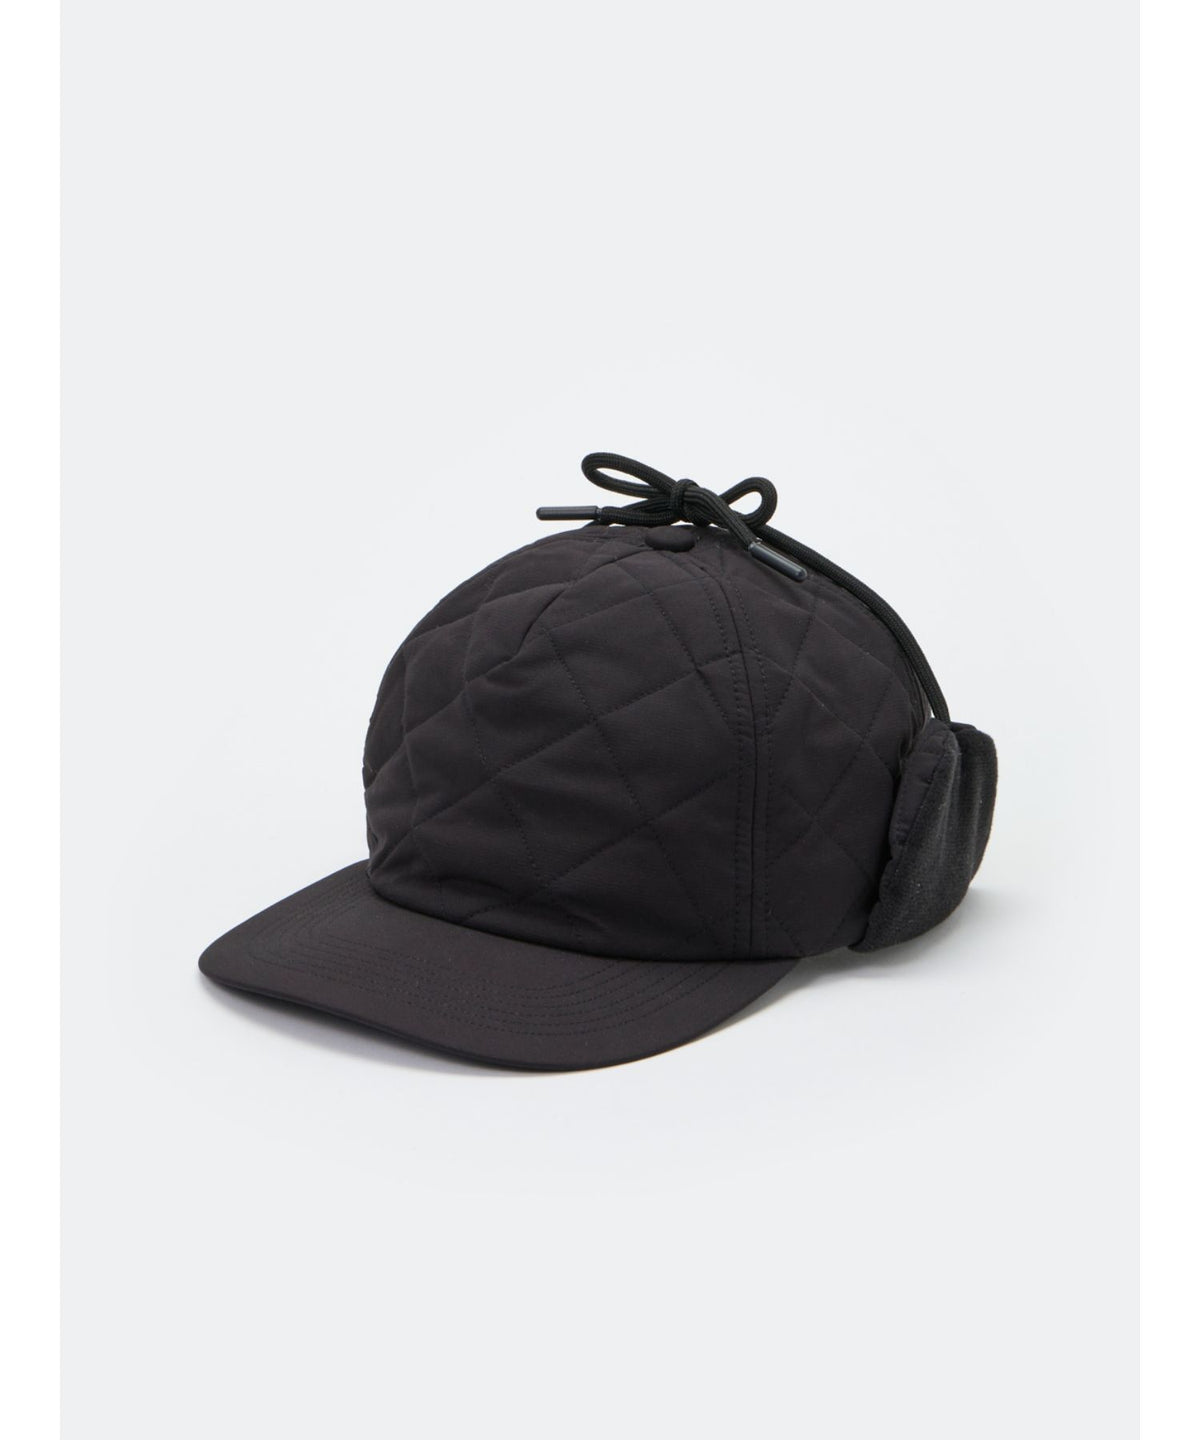 Tech Cold Proof Driving Cap